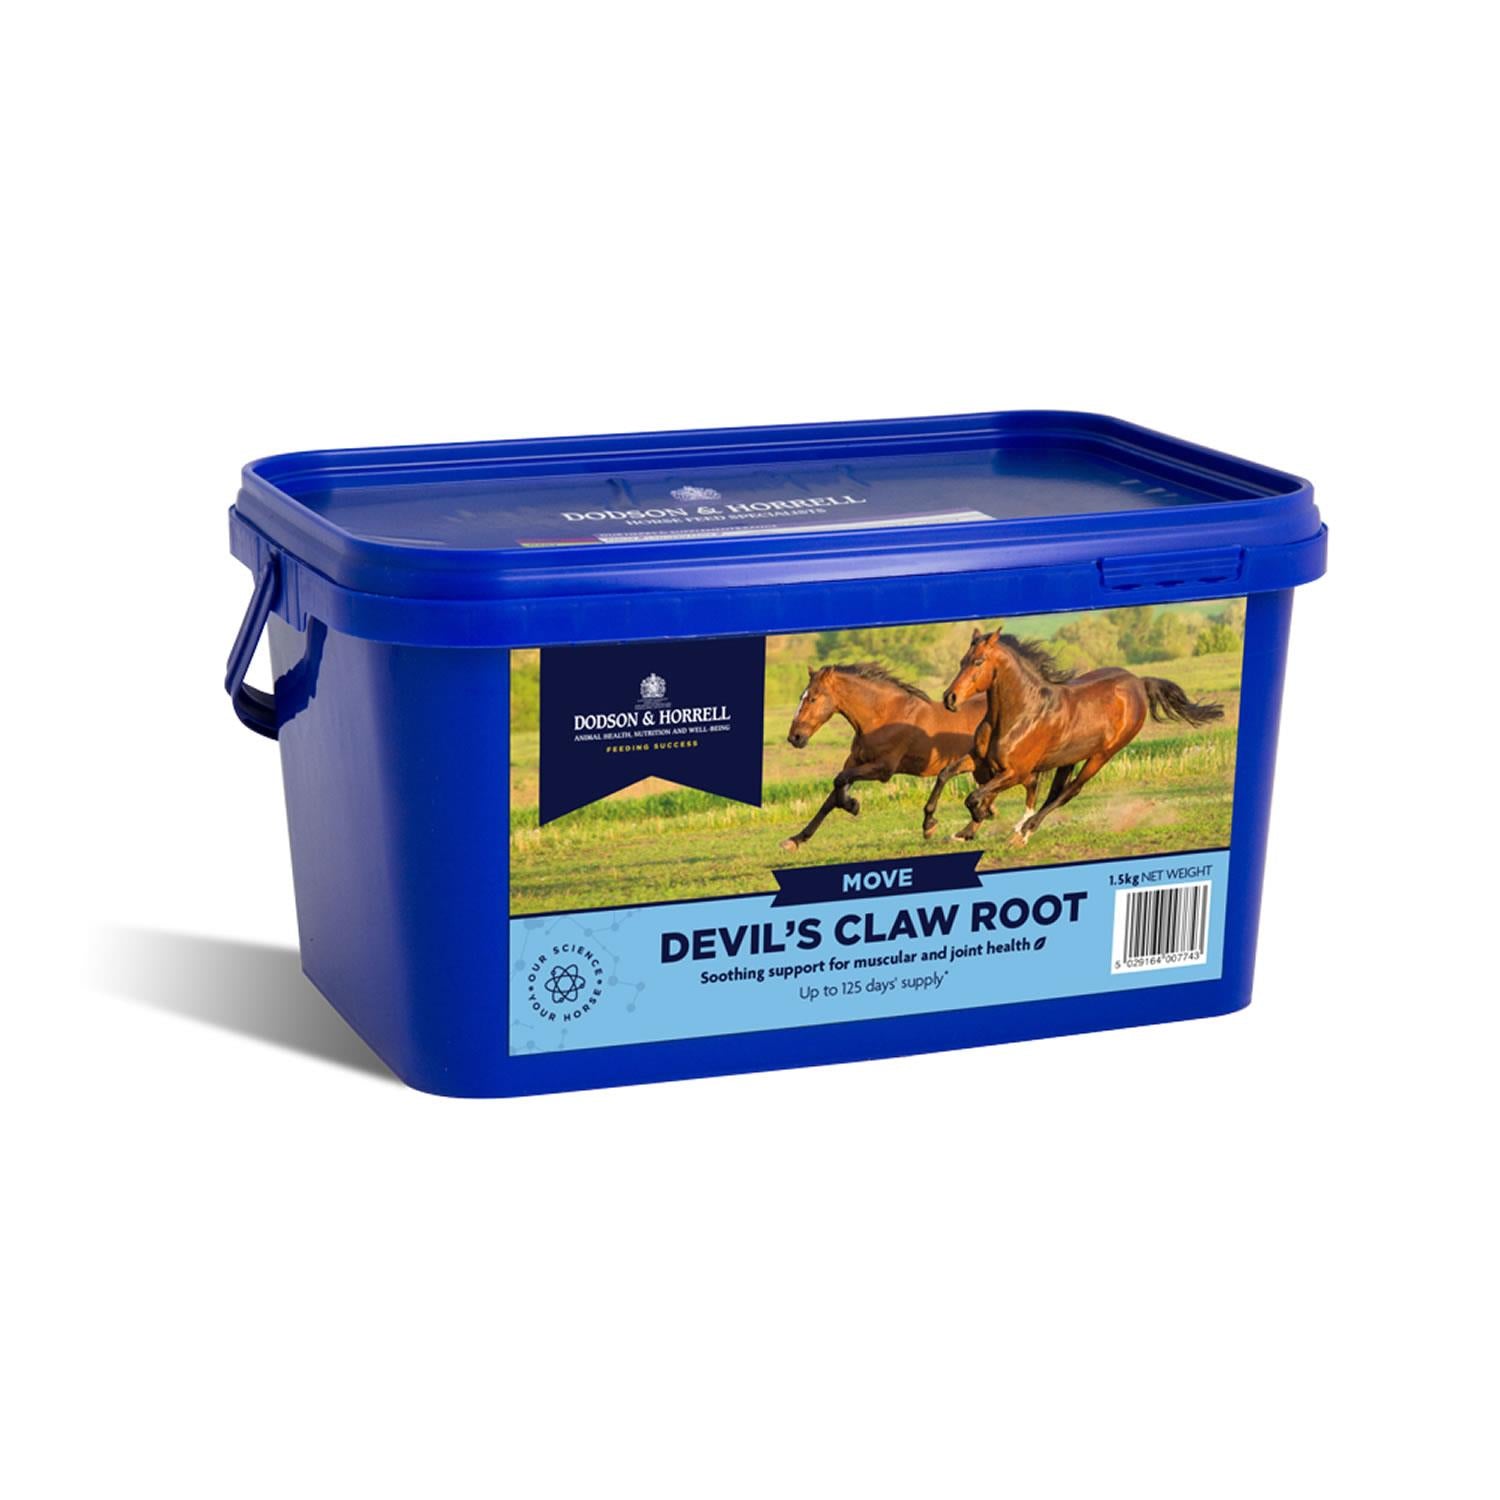 Dodson & Horrell Devil's Claw Root - enhance joint mobility in horses